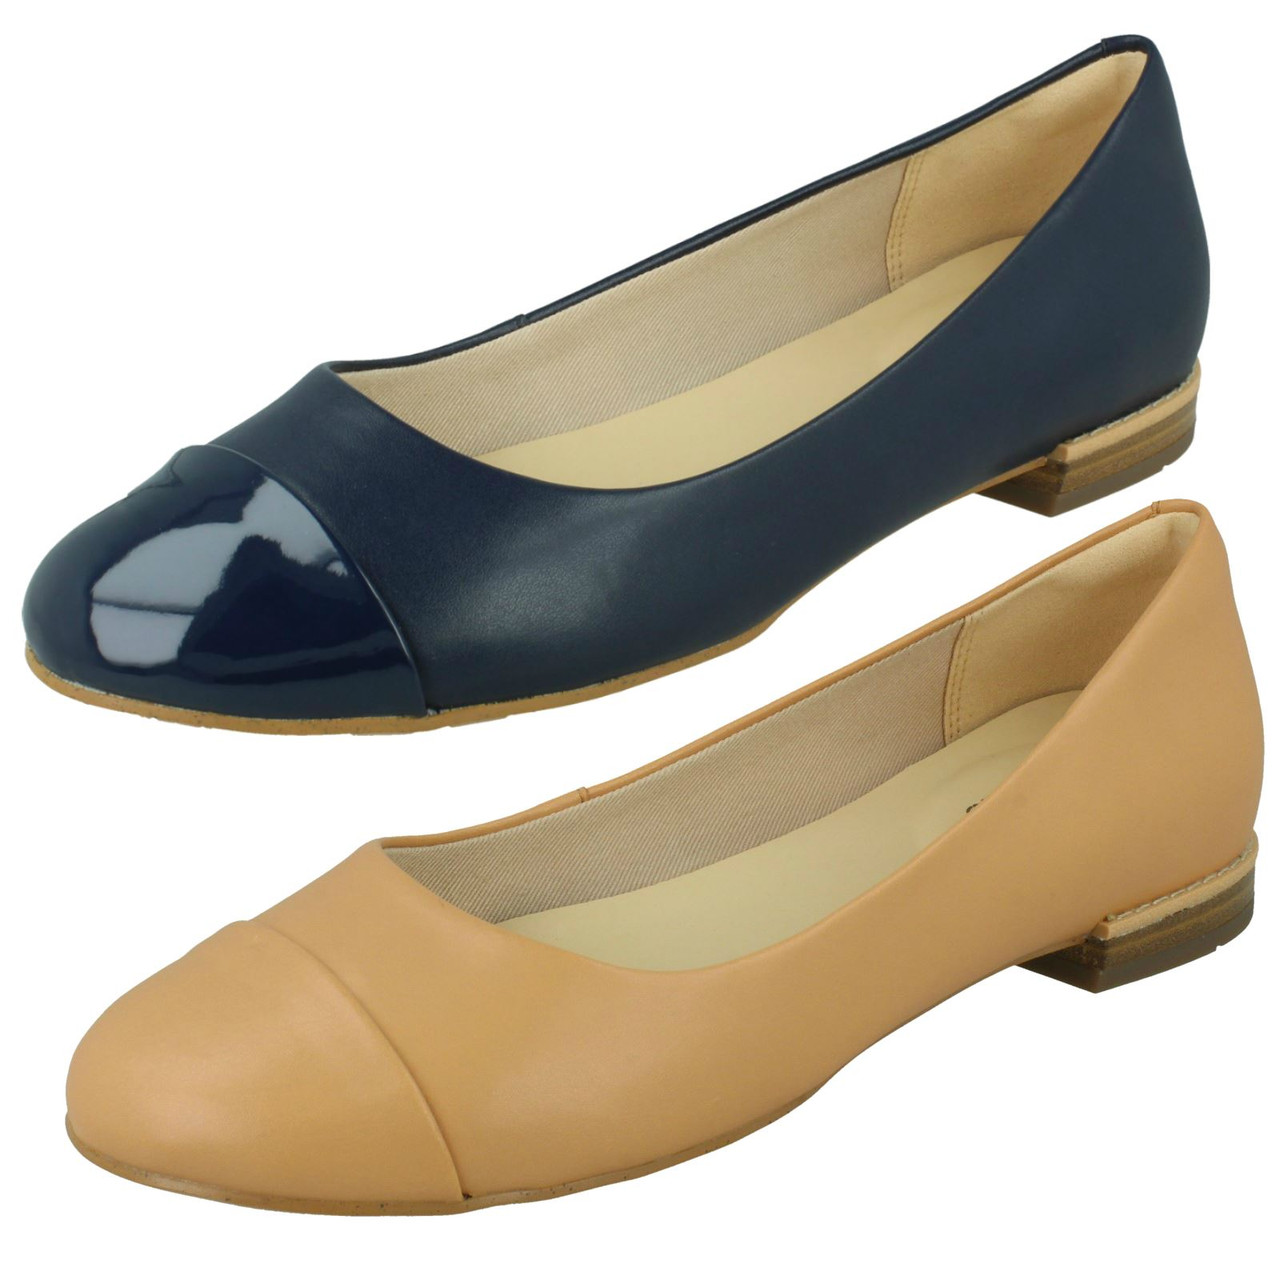 clarks ladies navy flat shoes